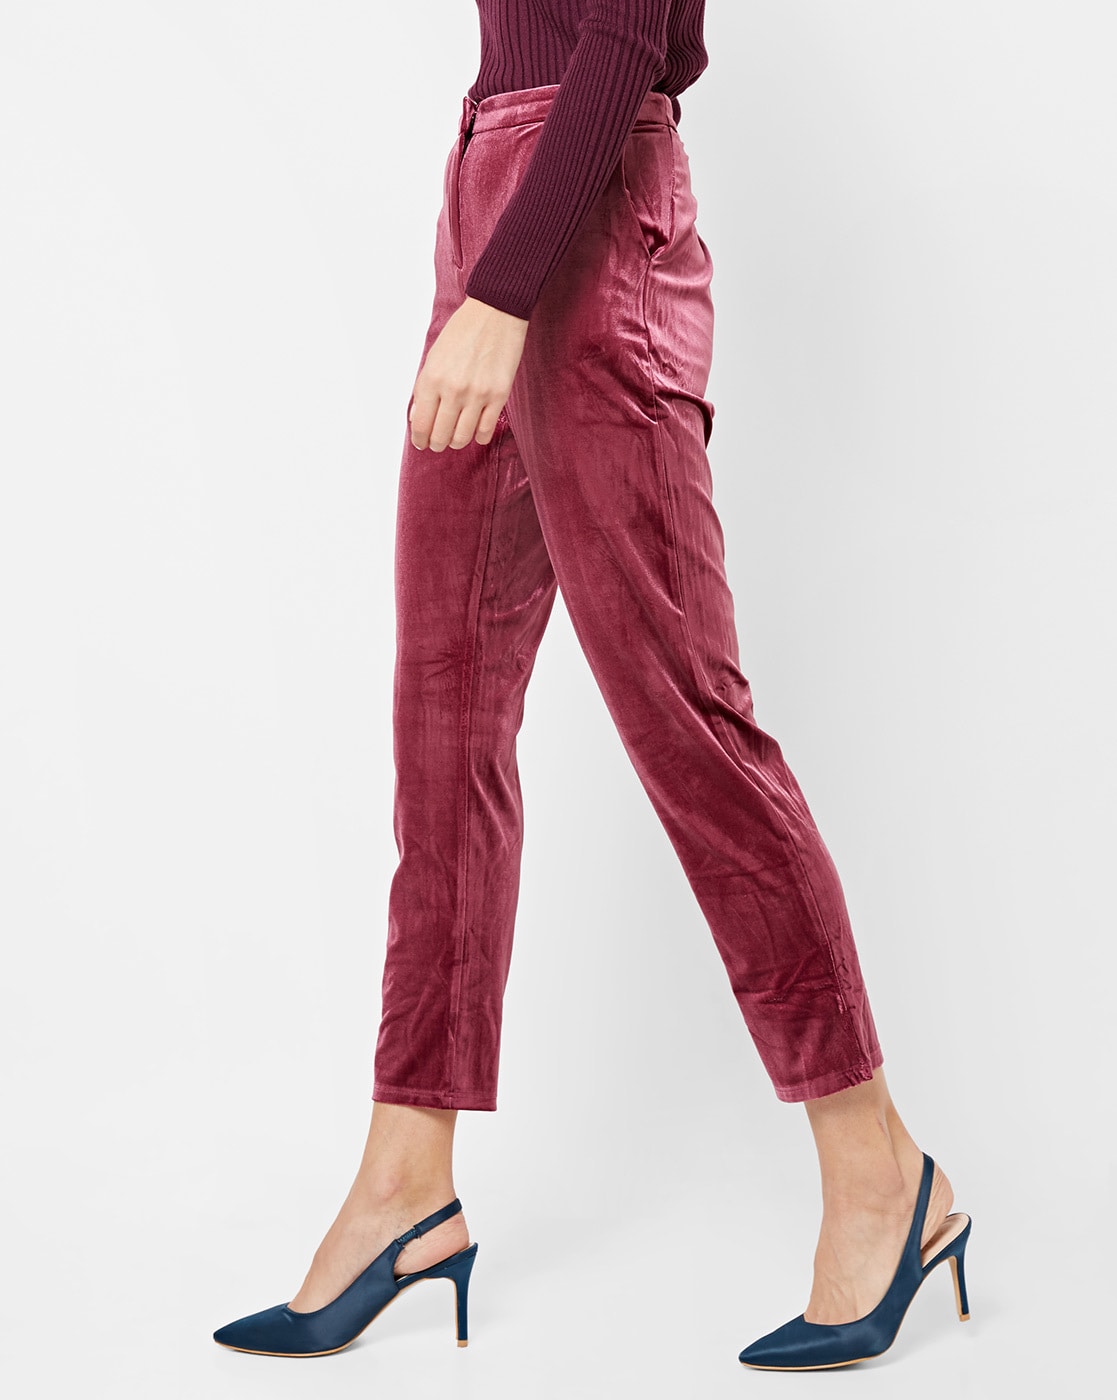 Burgundy Pants Summer Outfits For Women (48 ideas & outfits) | Burgundy  pants outfit, Velvet pants outfit, Burgundy pants